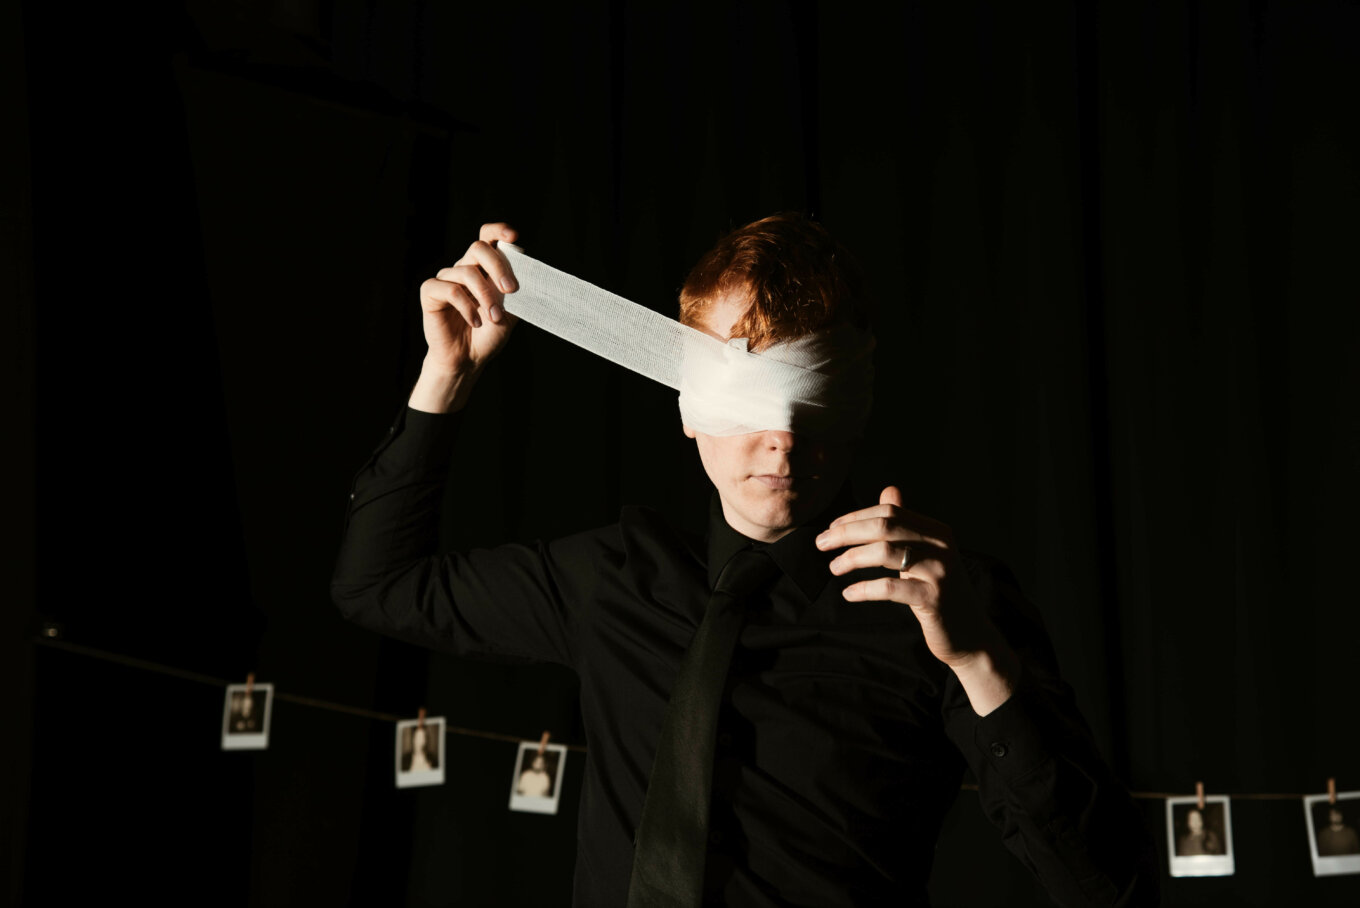 A person wraps a bandage around their eyes on a dark stage